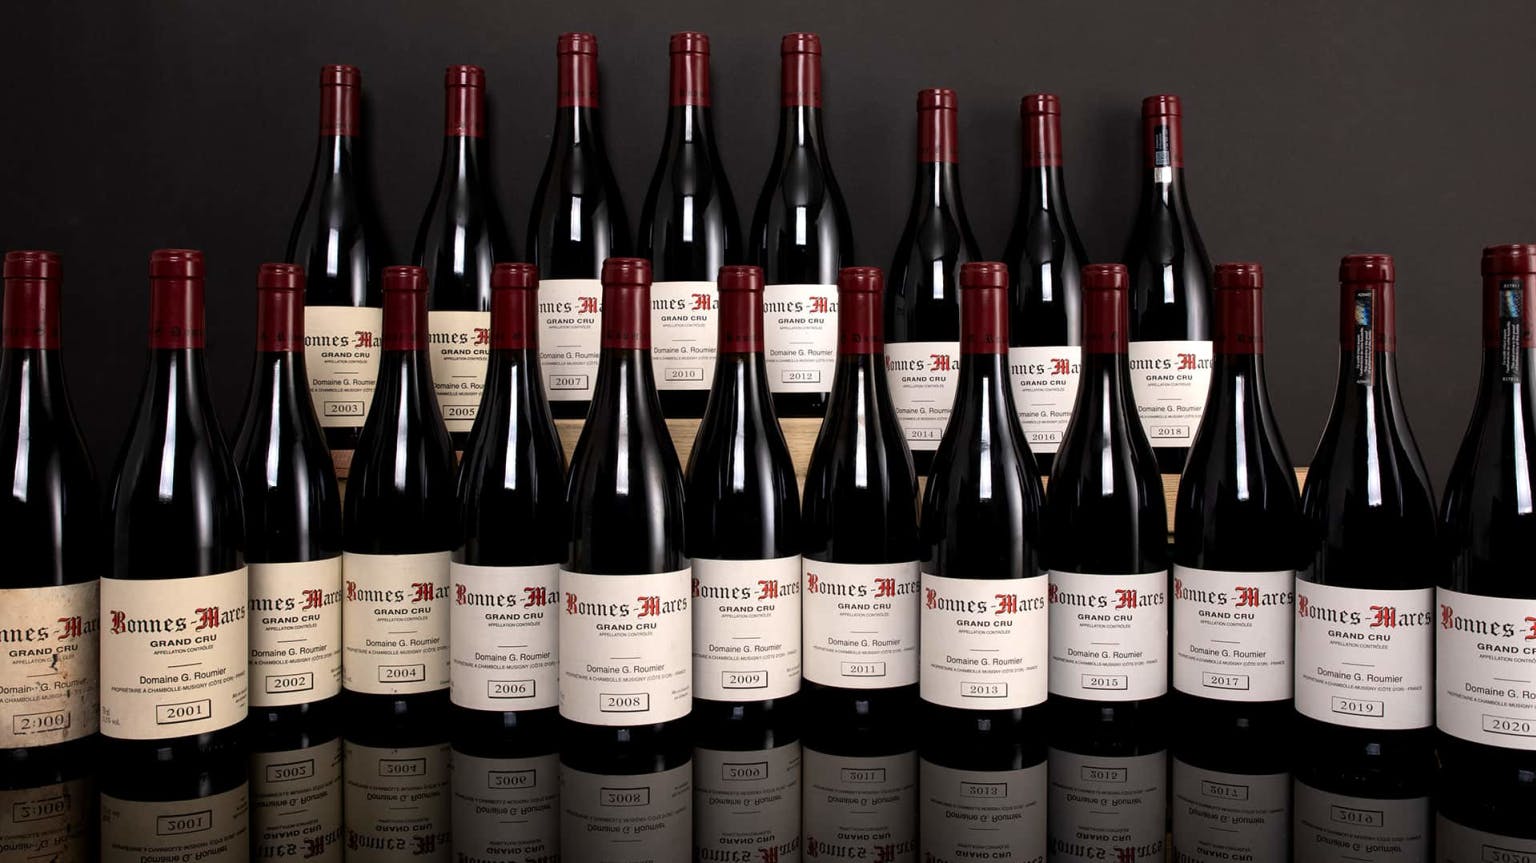 Two decades of Roumier’s Bonnes Mares with William Kelley 16:9